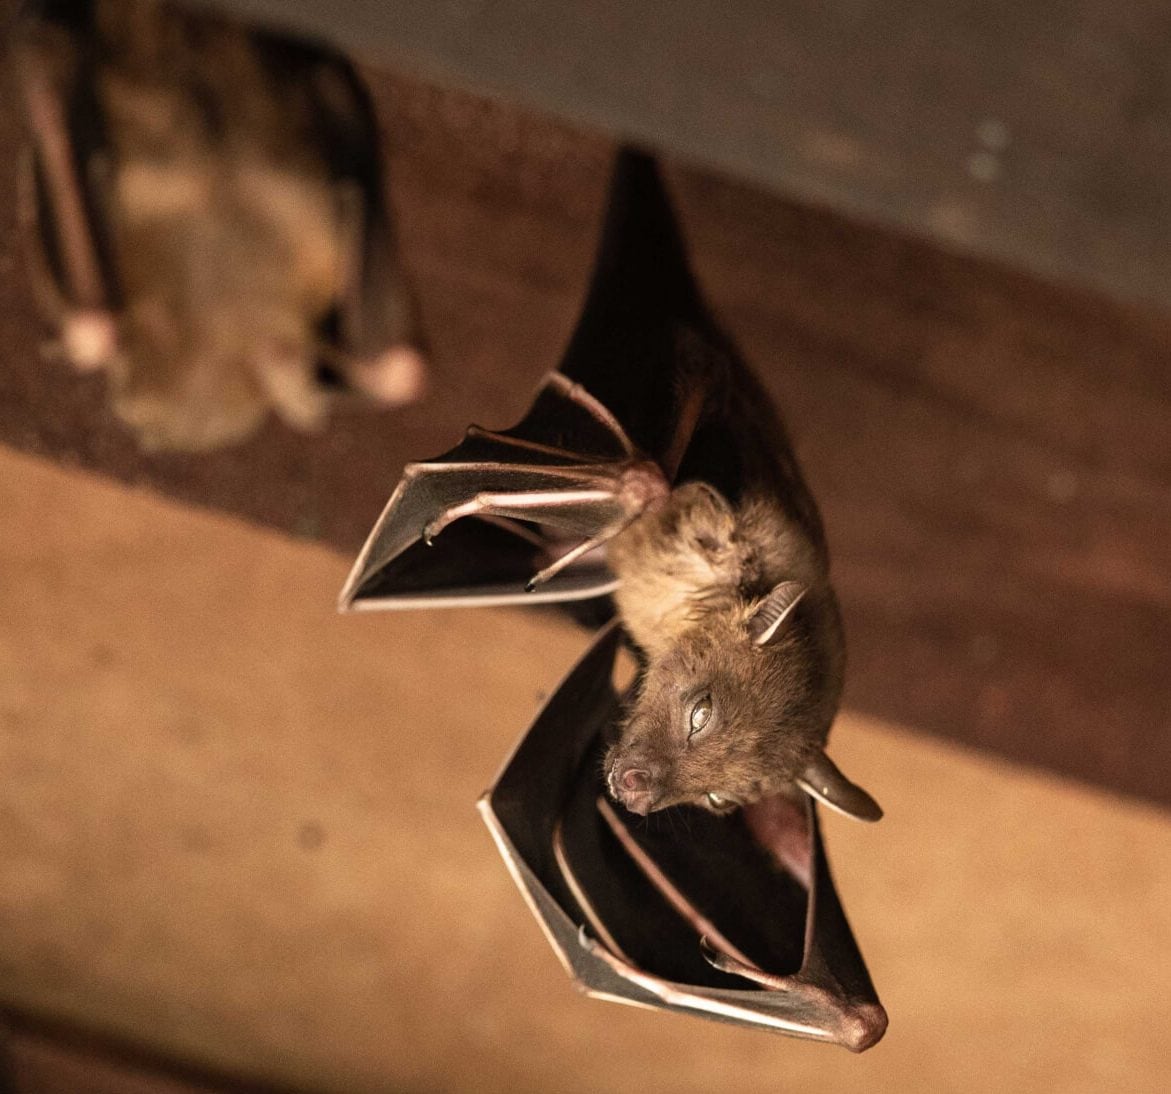 Expert bat removal services for a safe and humane solution in Long Island